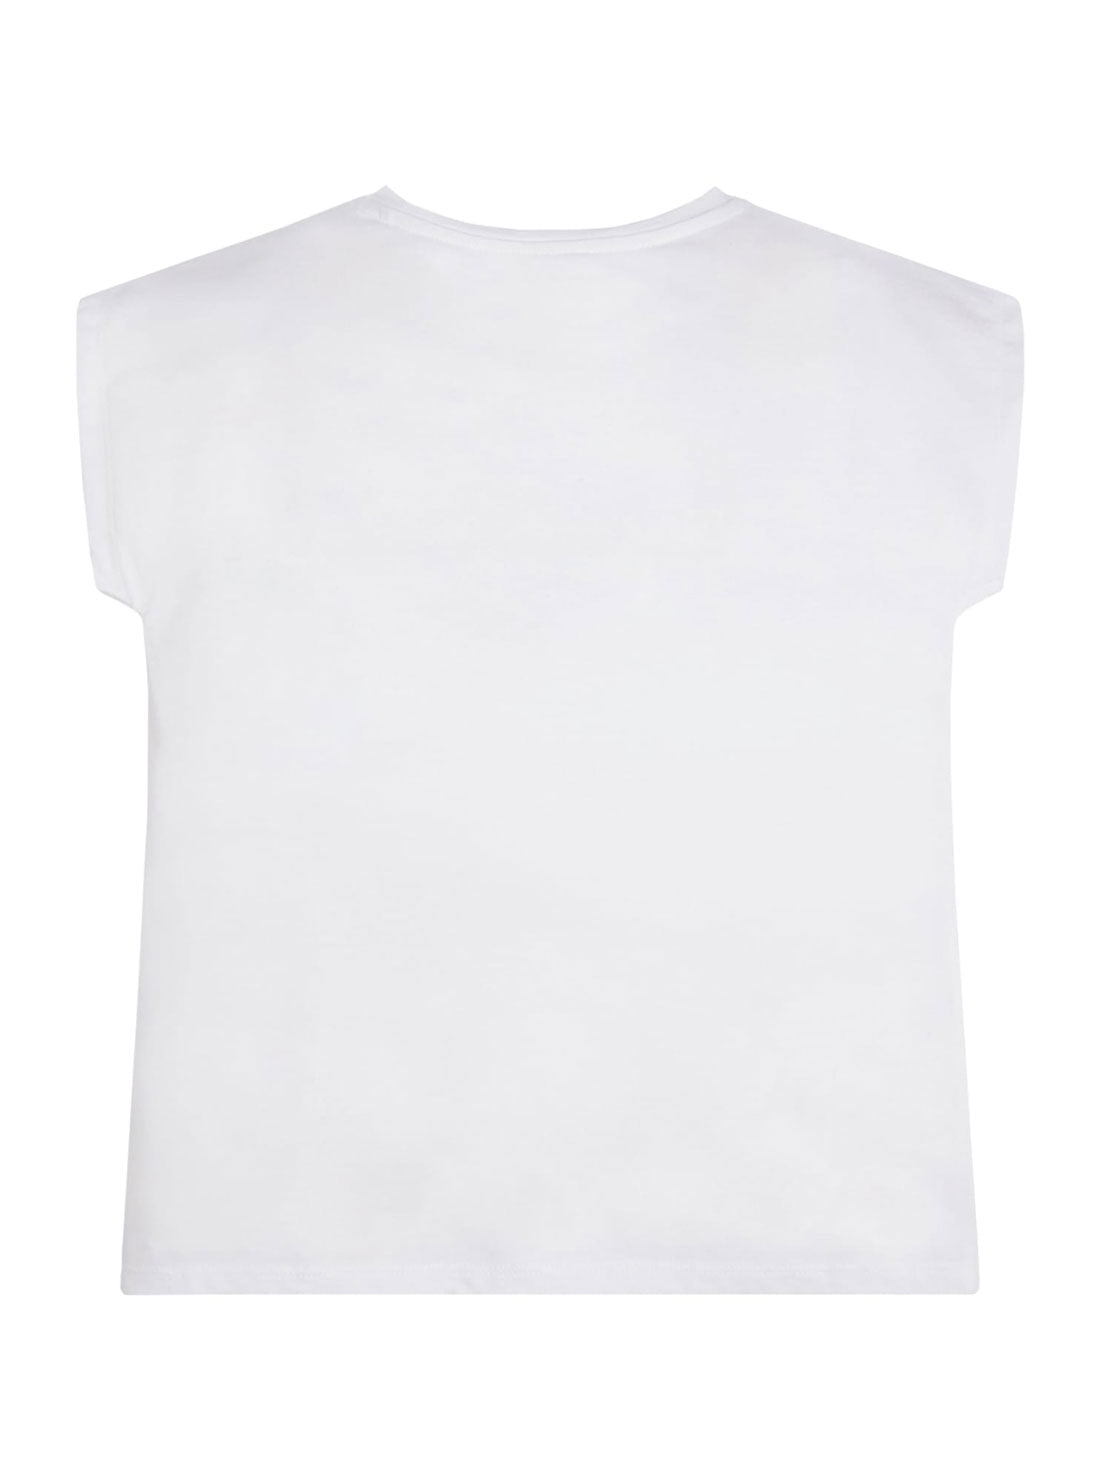 Eco Sequin Triangle Logo Girl's White T-Shirt (7-16) back view